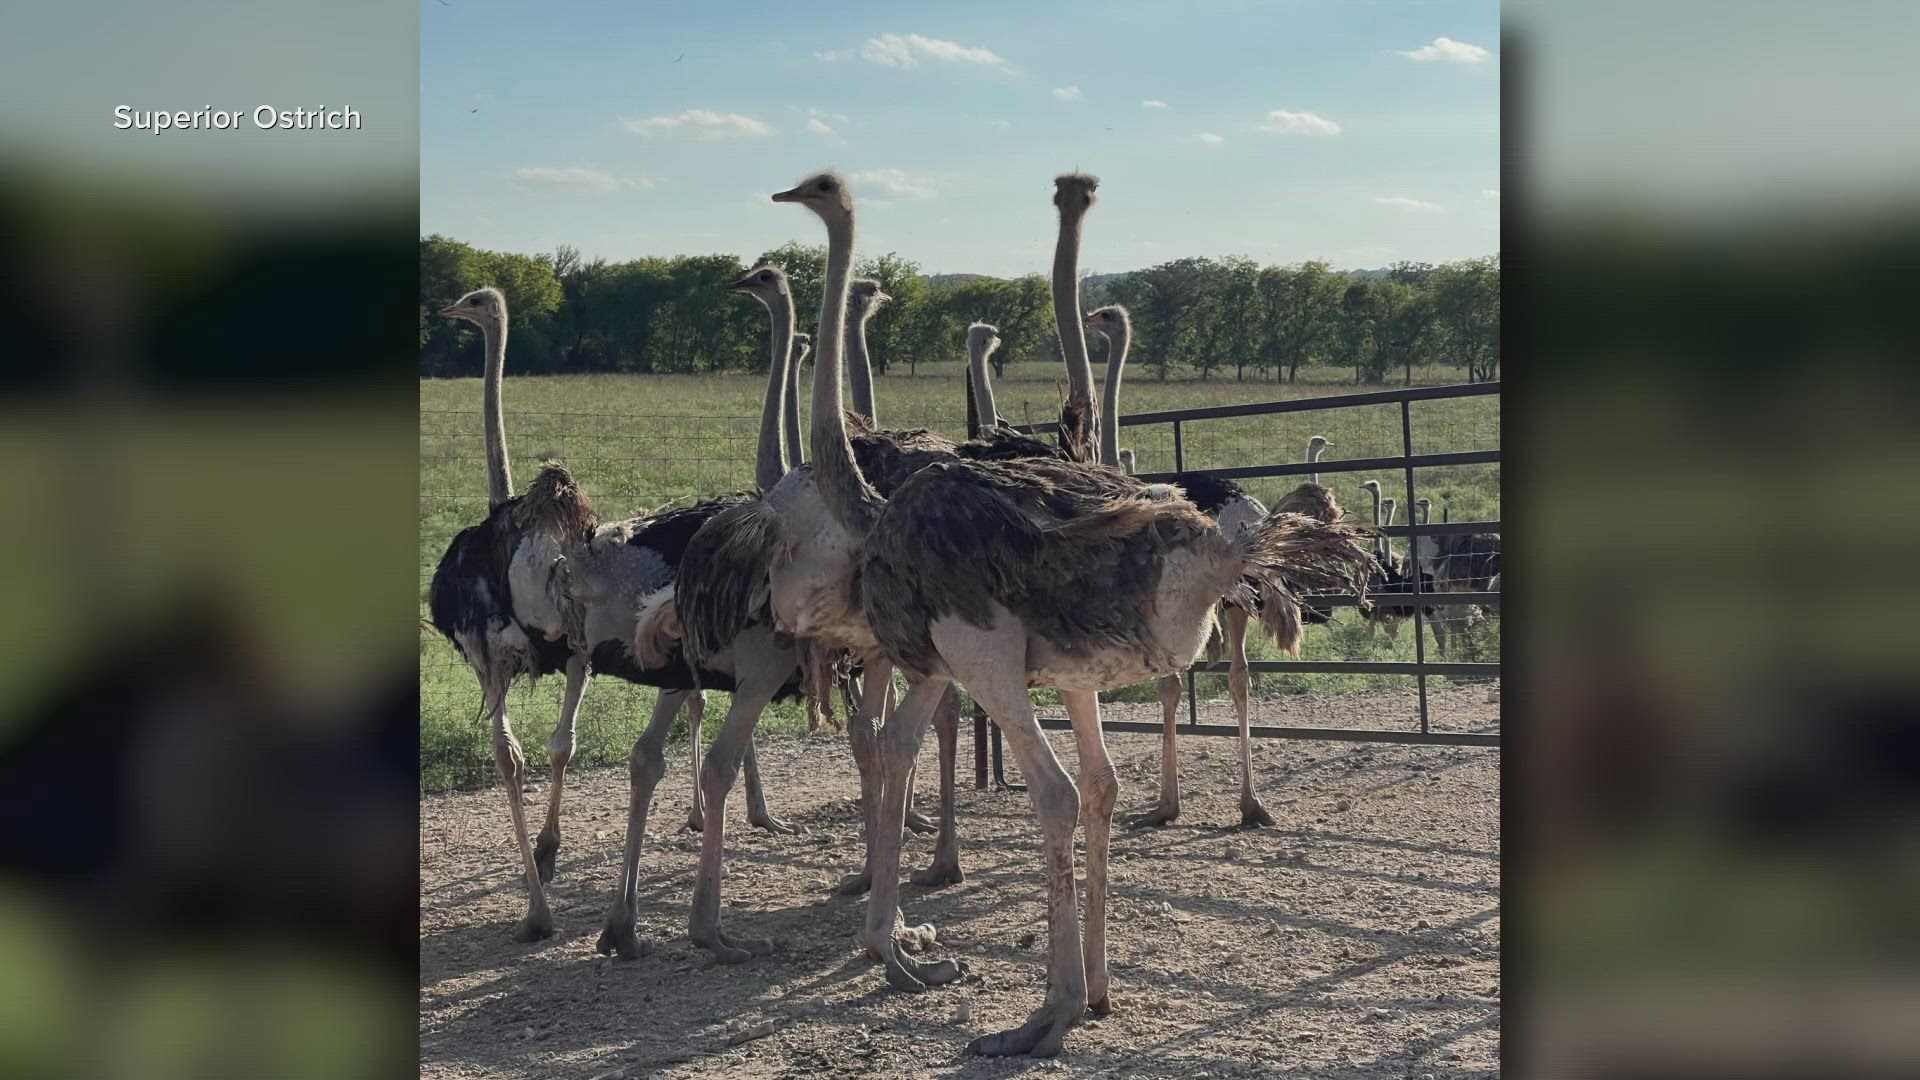 While spotting an ostrich in Texas is an unusual sight, the ranch owners advise anyone that comes across one to call the Superior Ostrich Ranch.